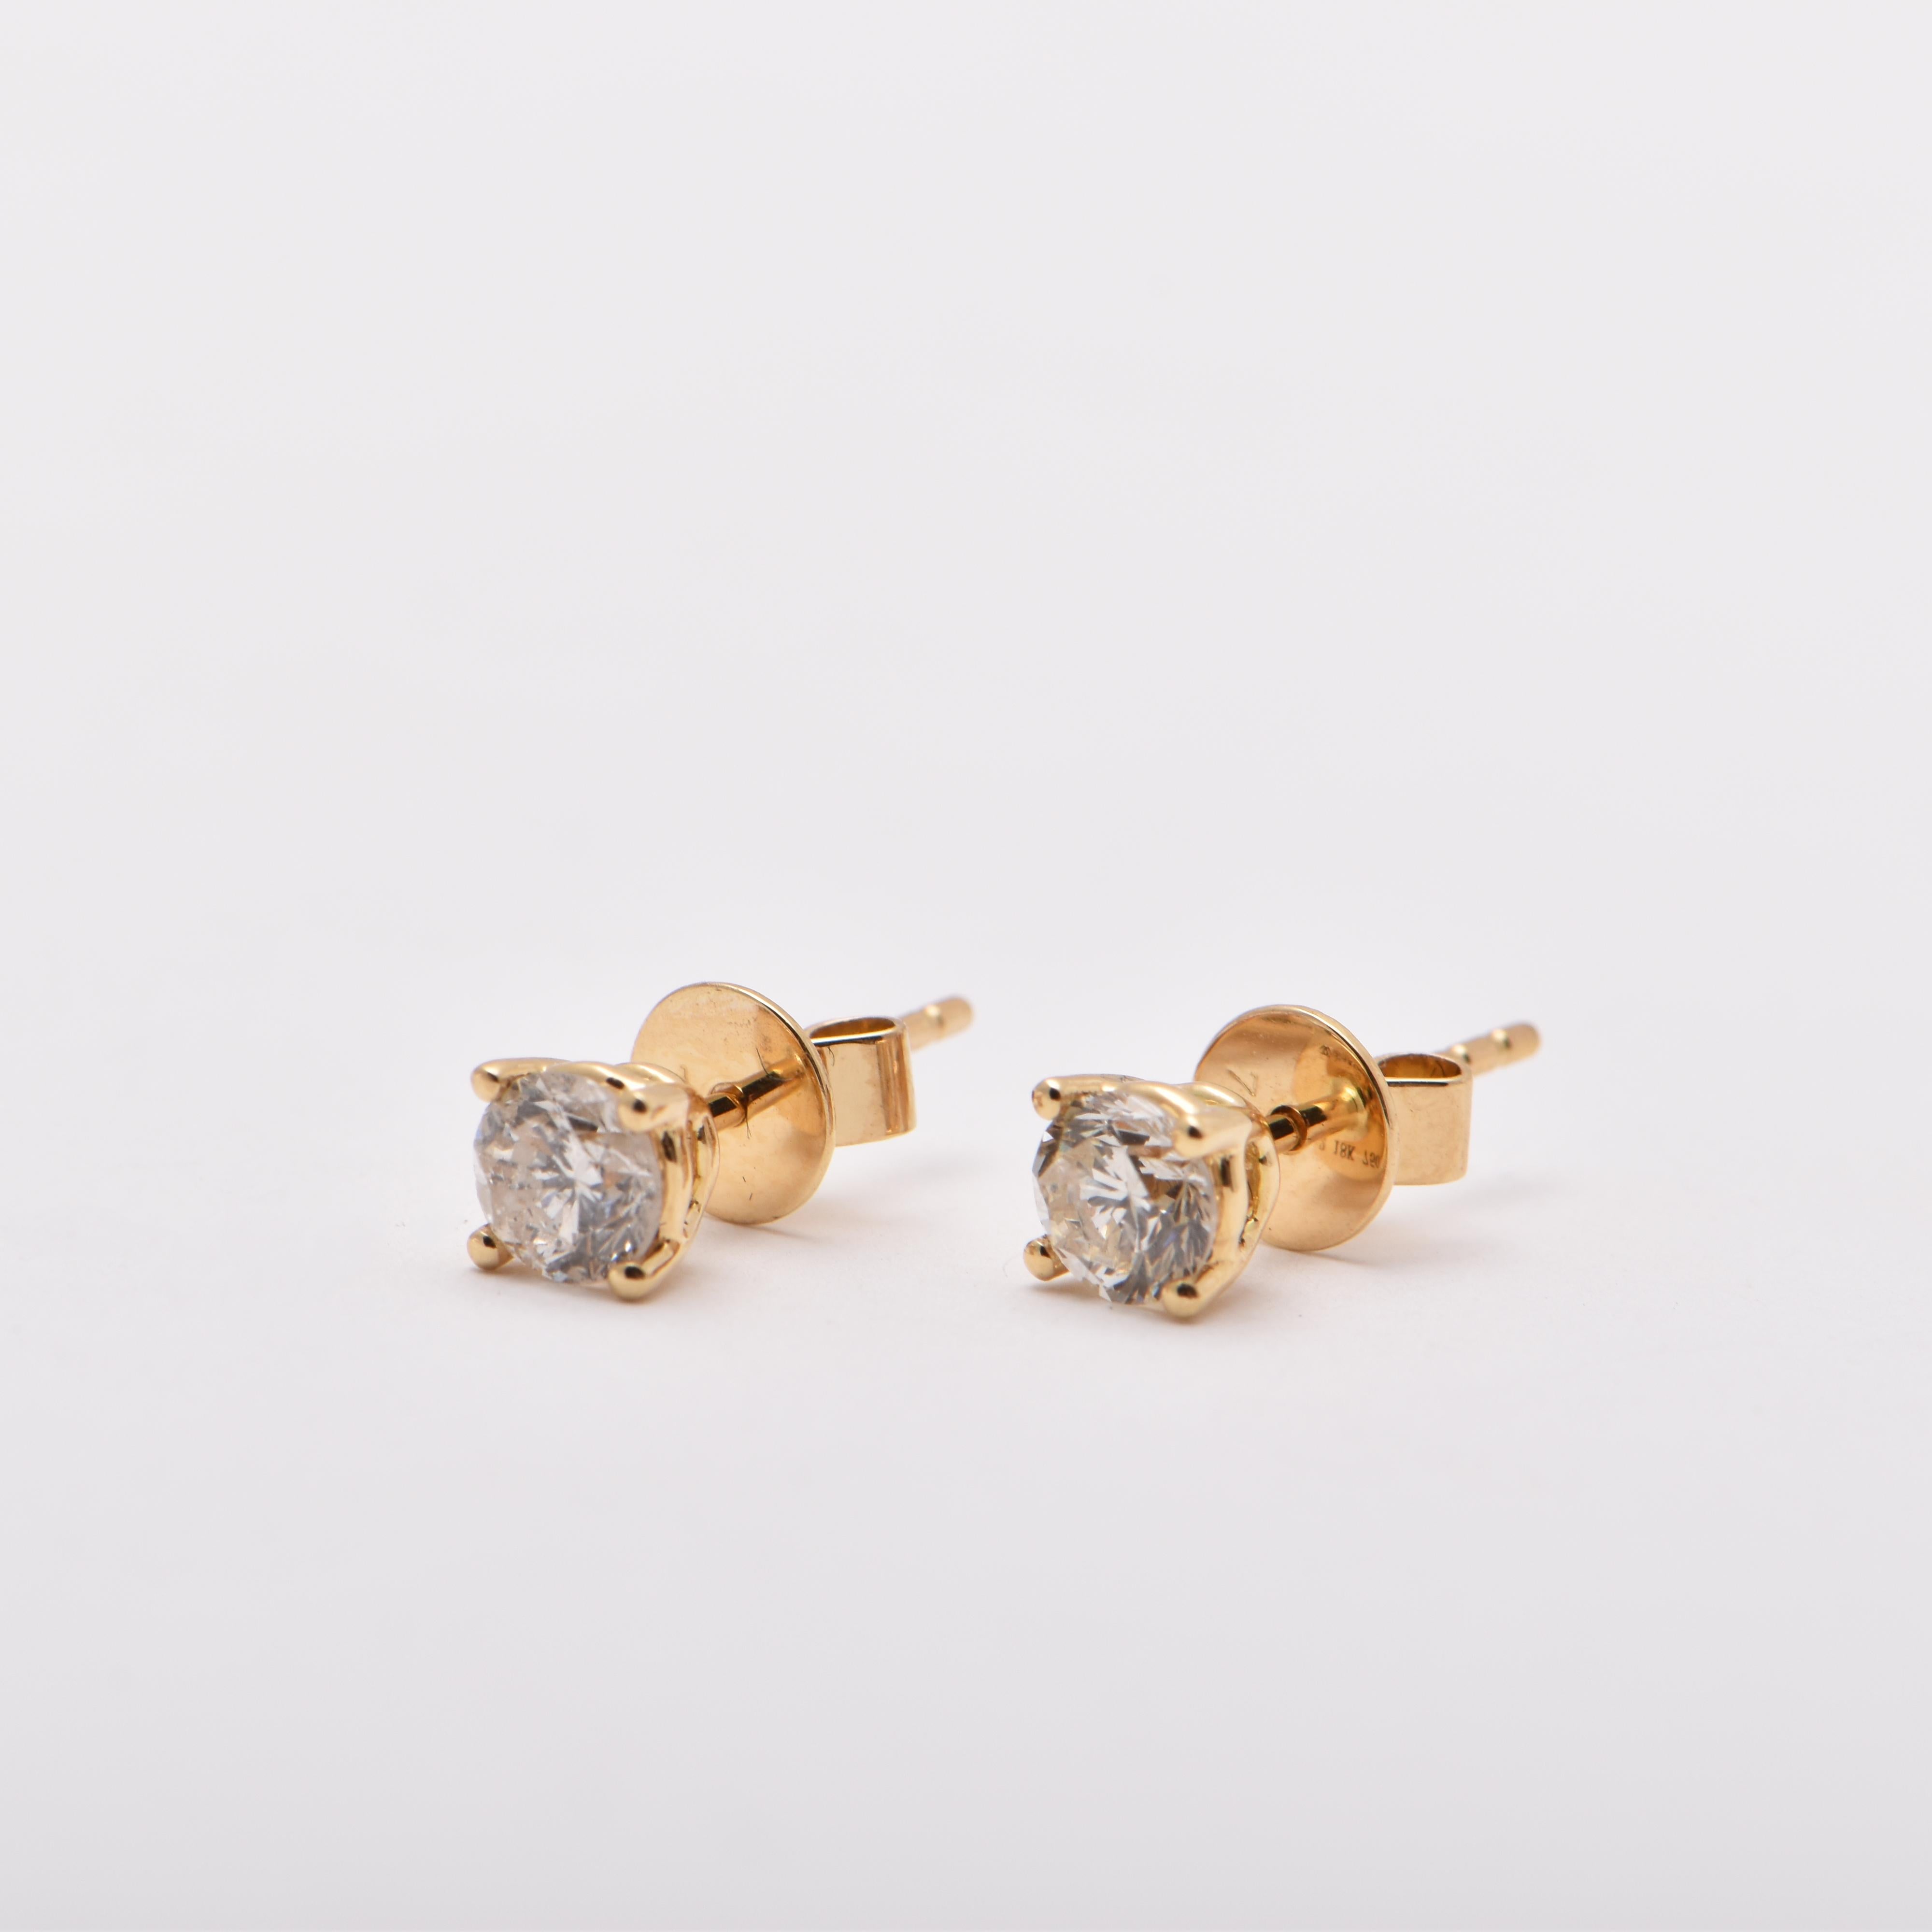 0.68 Carat Diamond Studs in 18 Carat Yellow Gold In New Condition For Sale In Sydney, AU